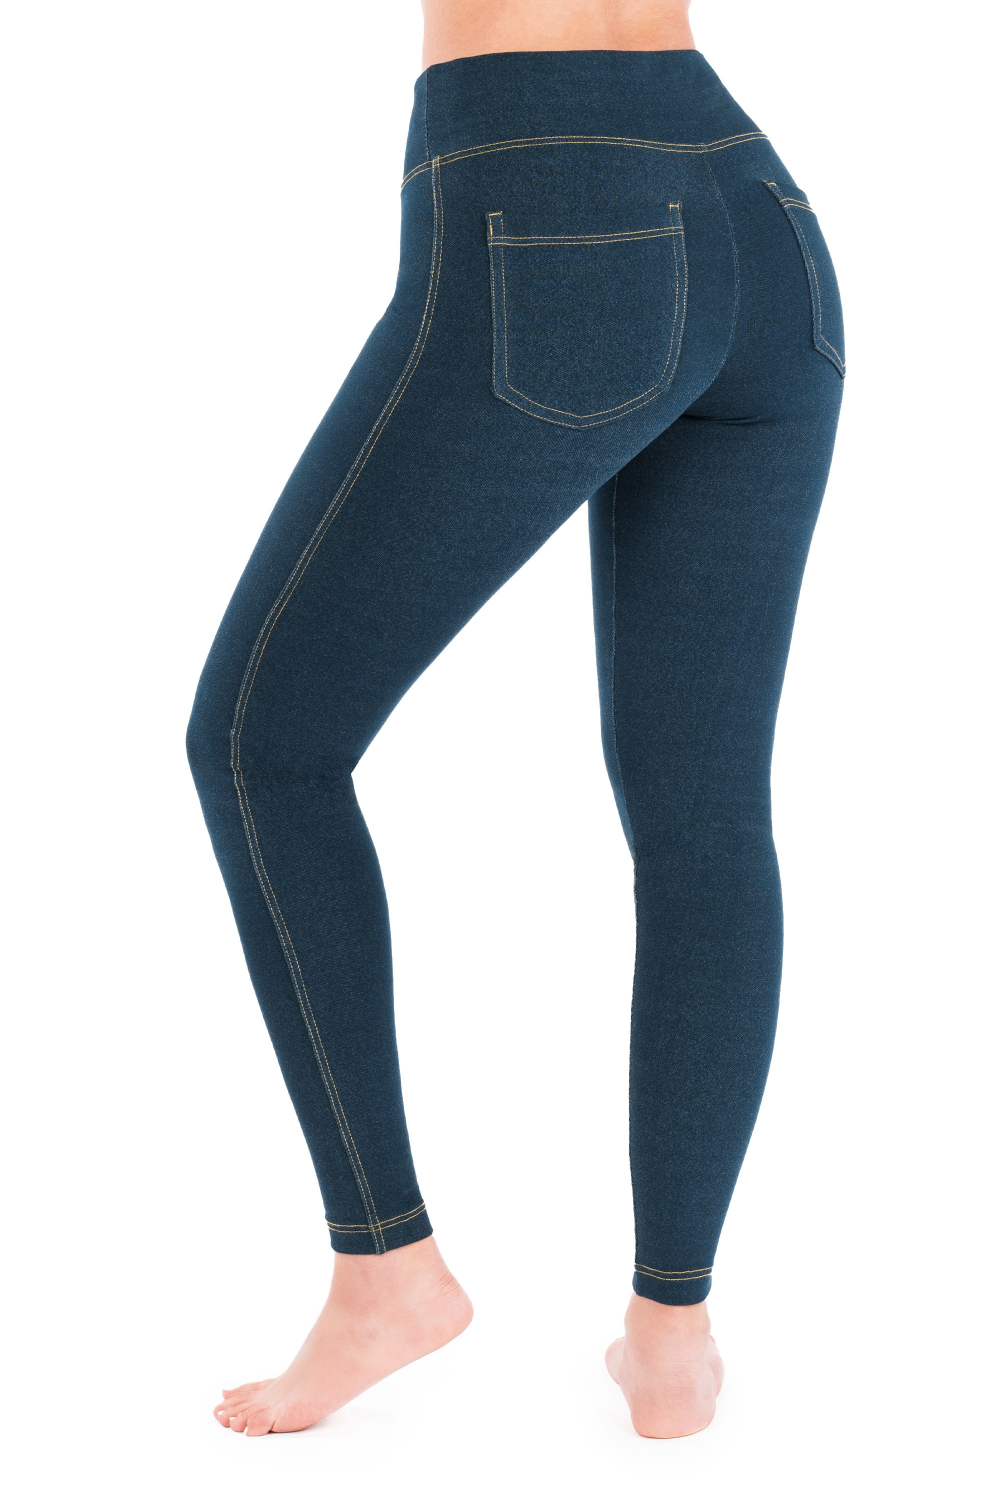 Northern Miles Solid Blue Jeggings for Women at Rs 599.00